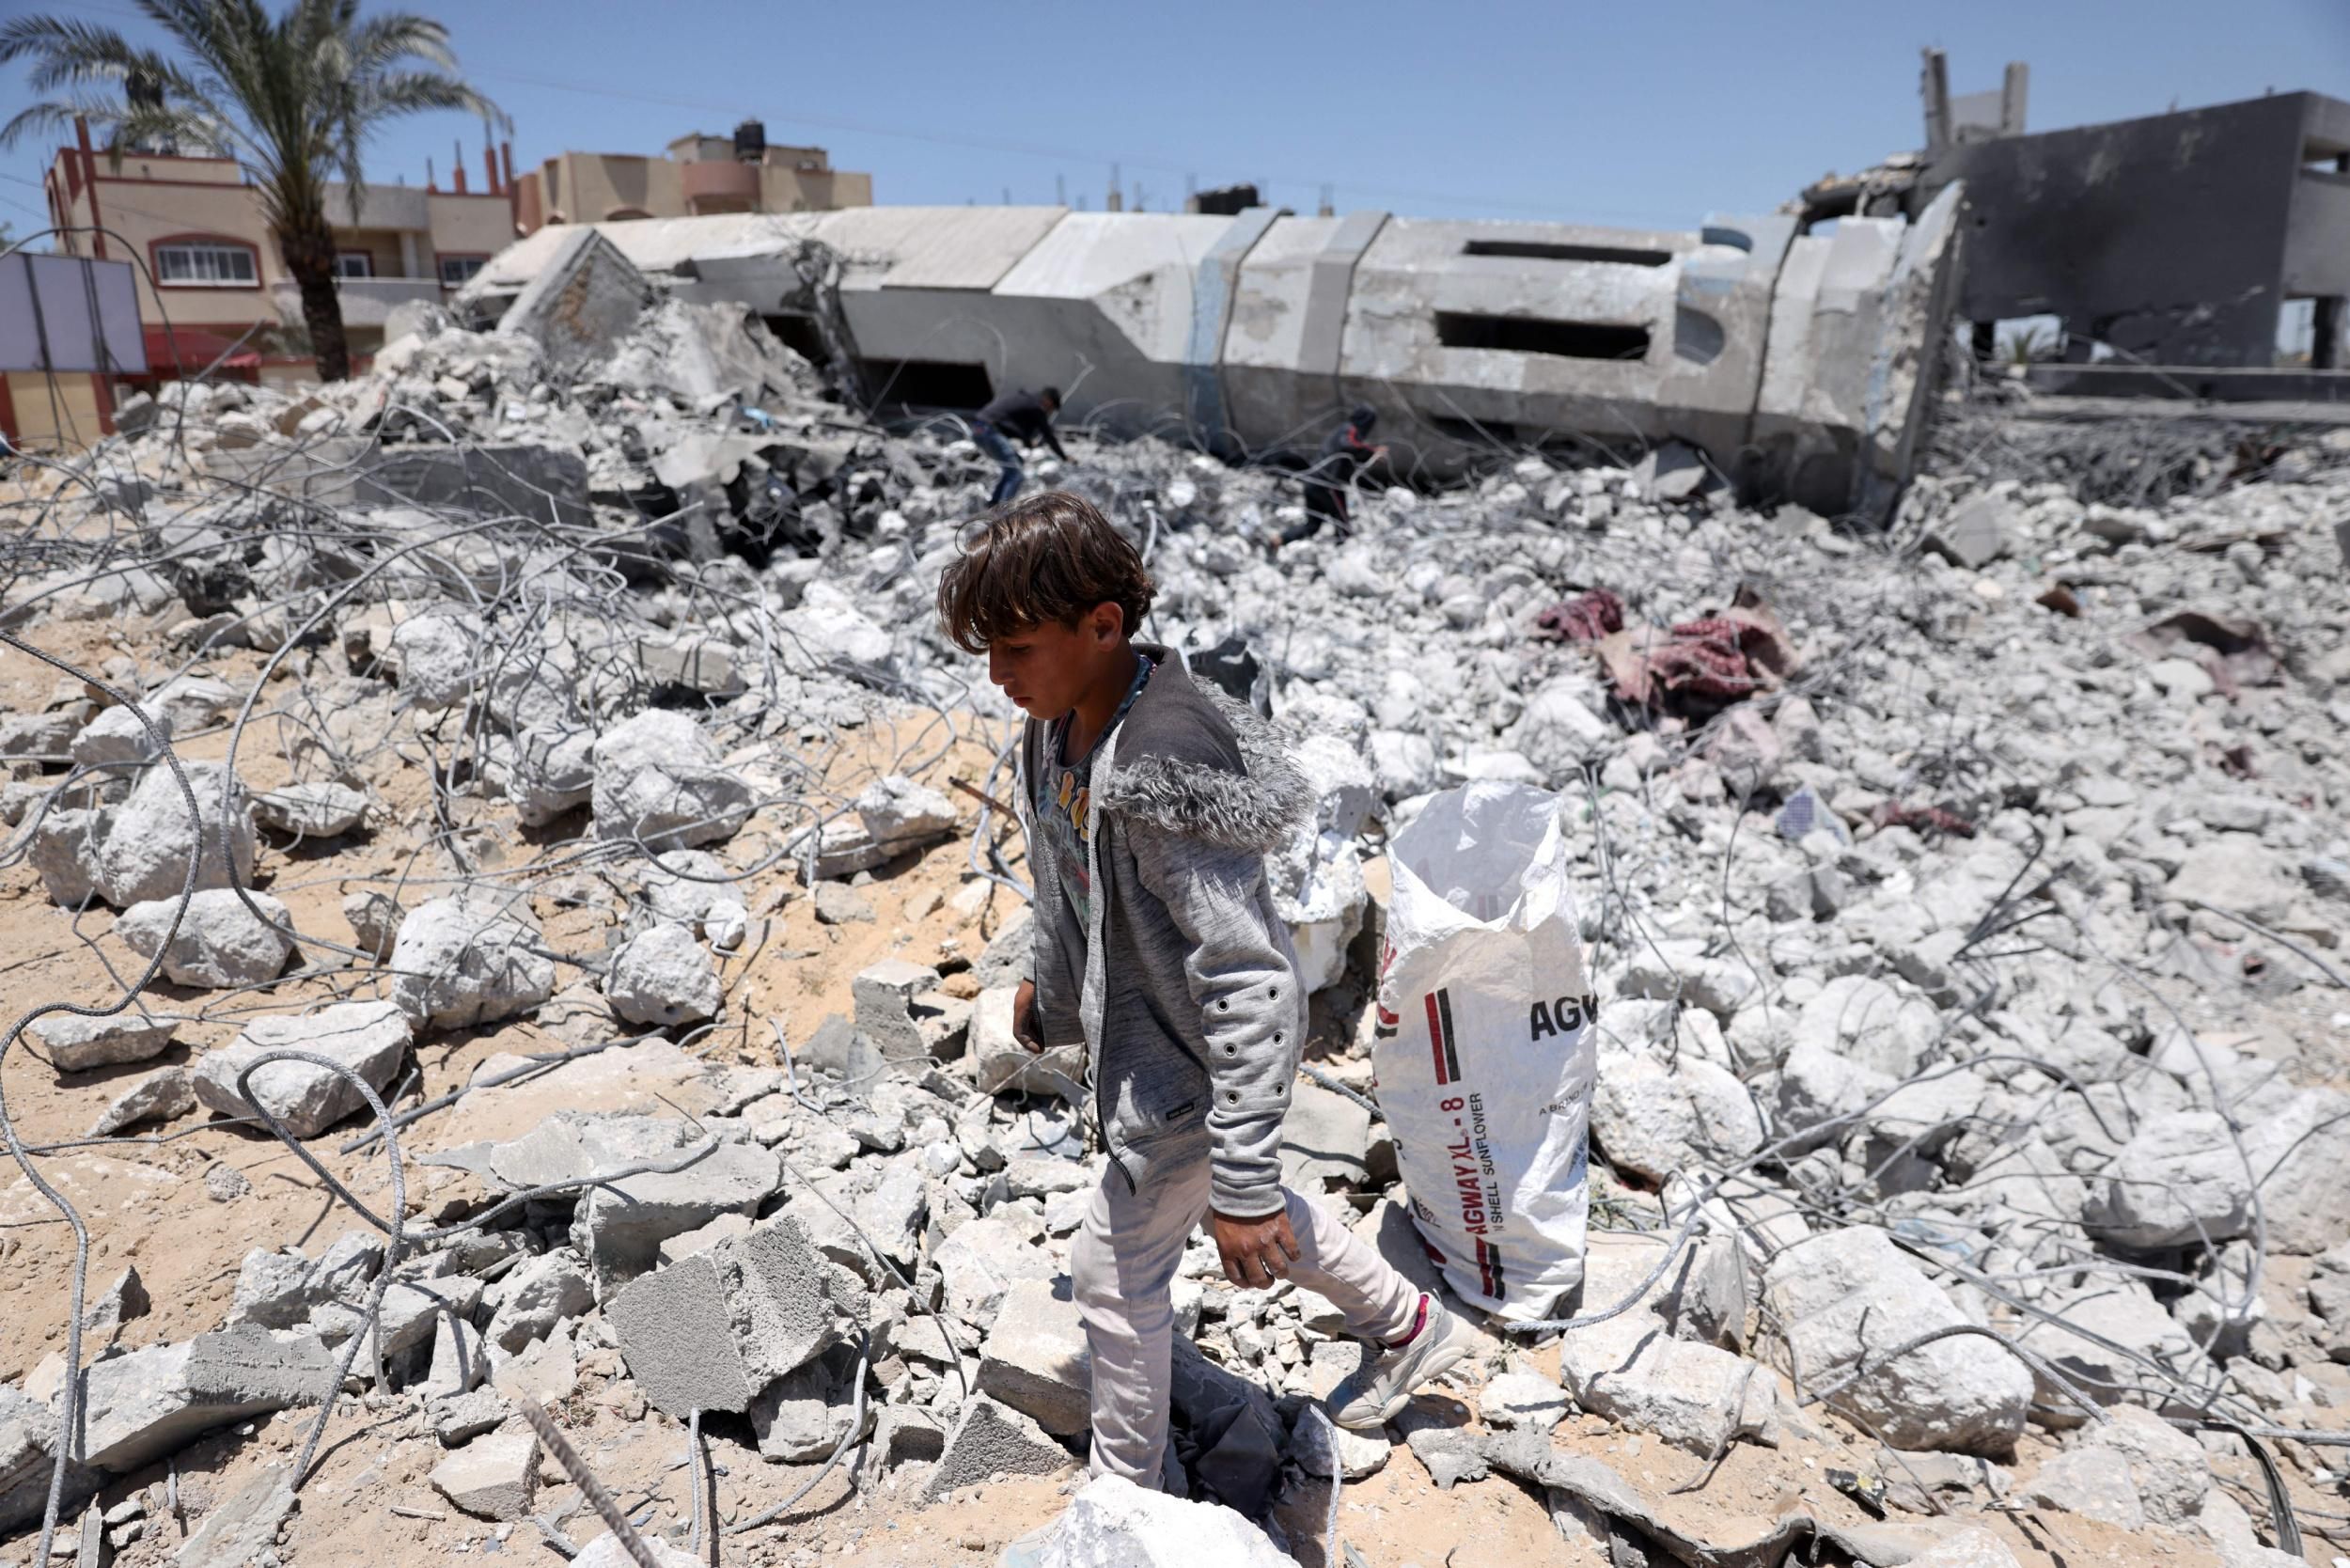 A Palestinian child collects debris from the rubble of a destroyed mosque in Beit Lahia, in the northern Gaza Strip, on May 27, 2021. (Photo: Thomas Coex/AFP via Getty Images)